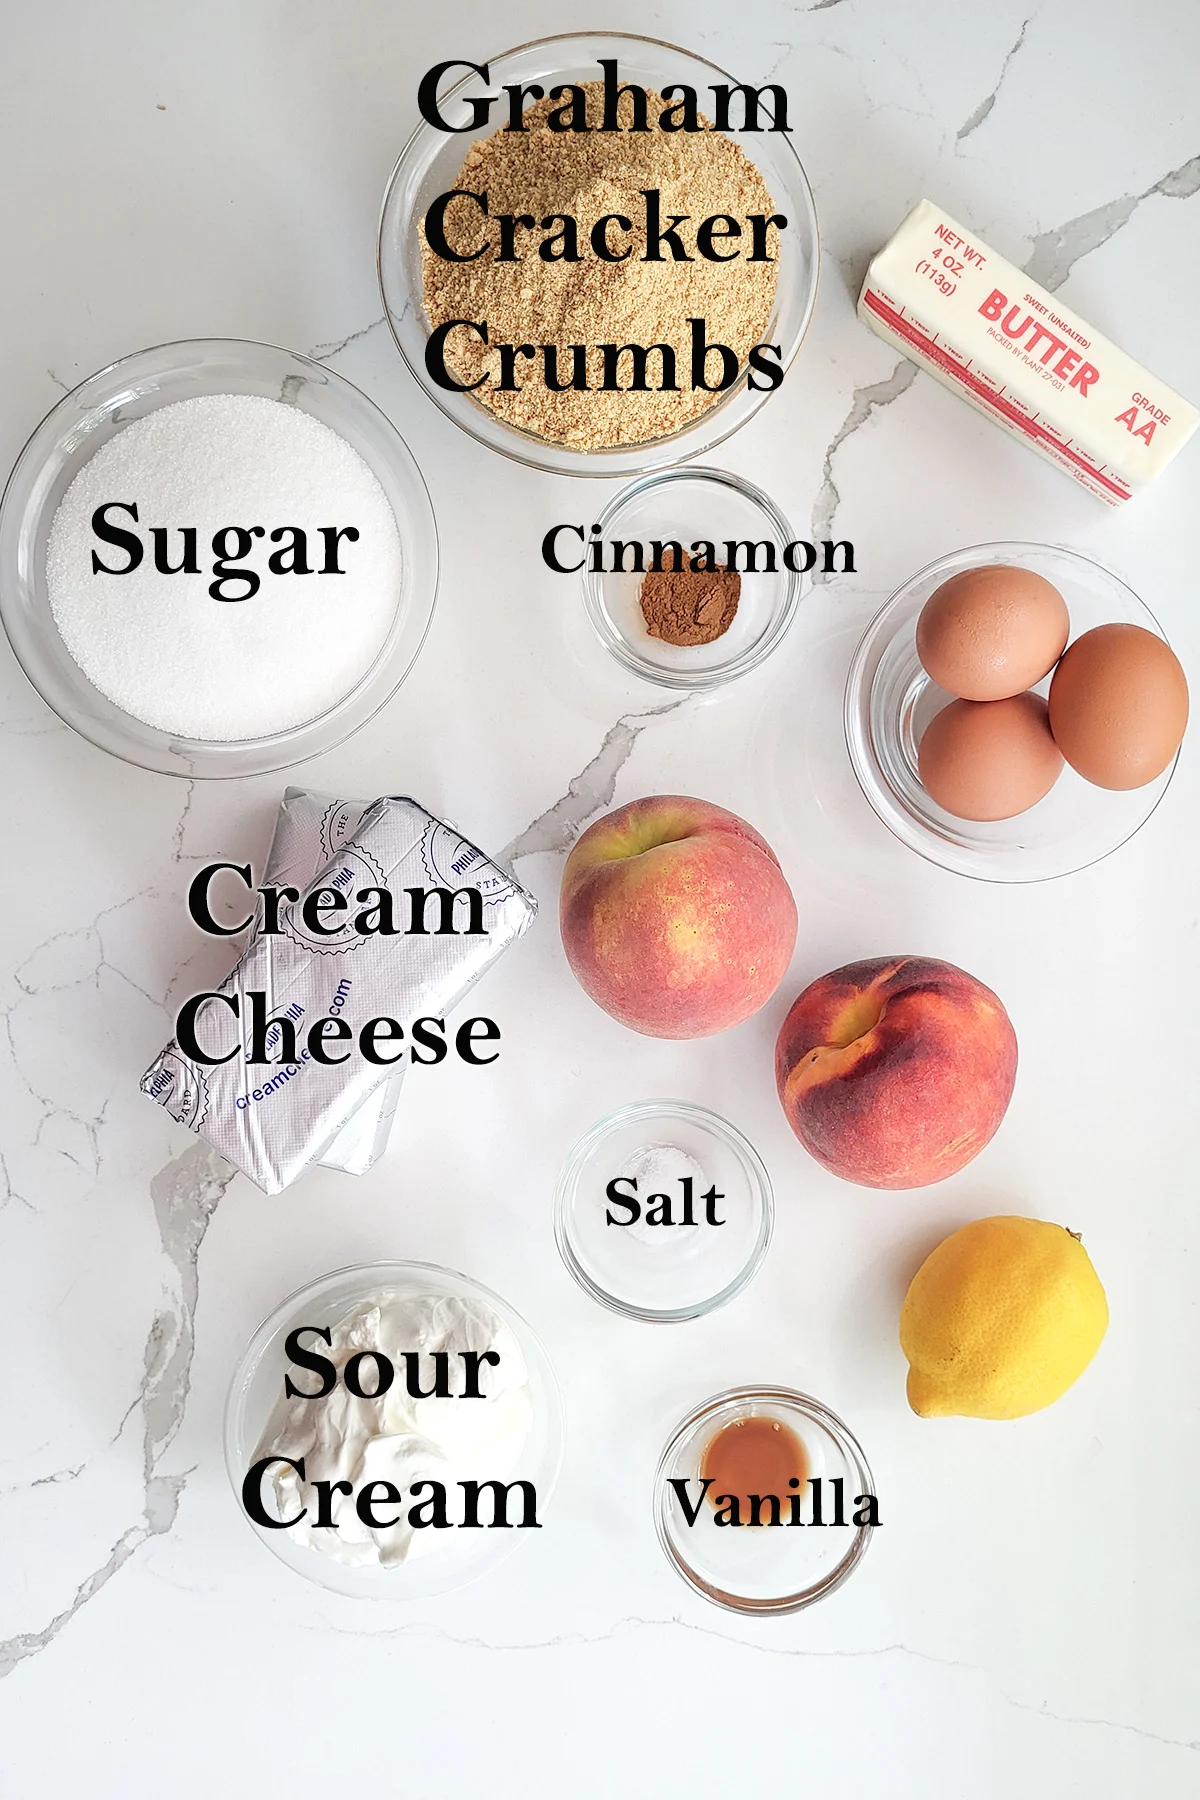 INGREDIENTS for making peach cheesecake in glass bowls on a white surface.